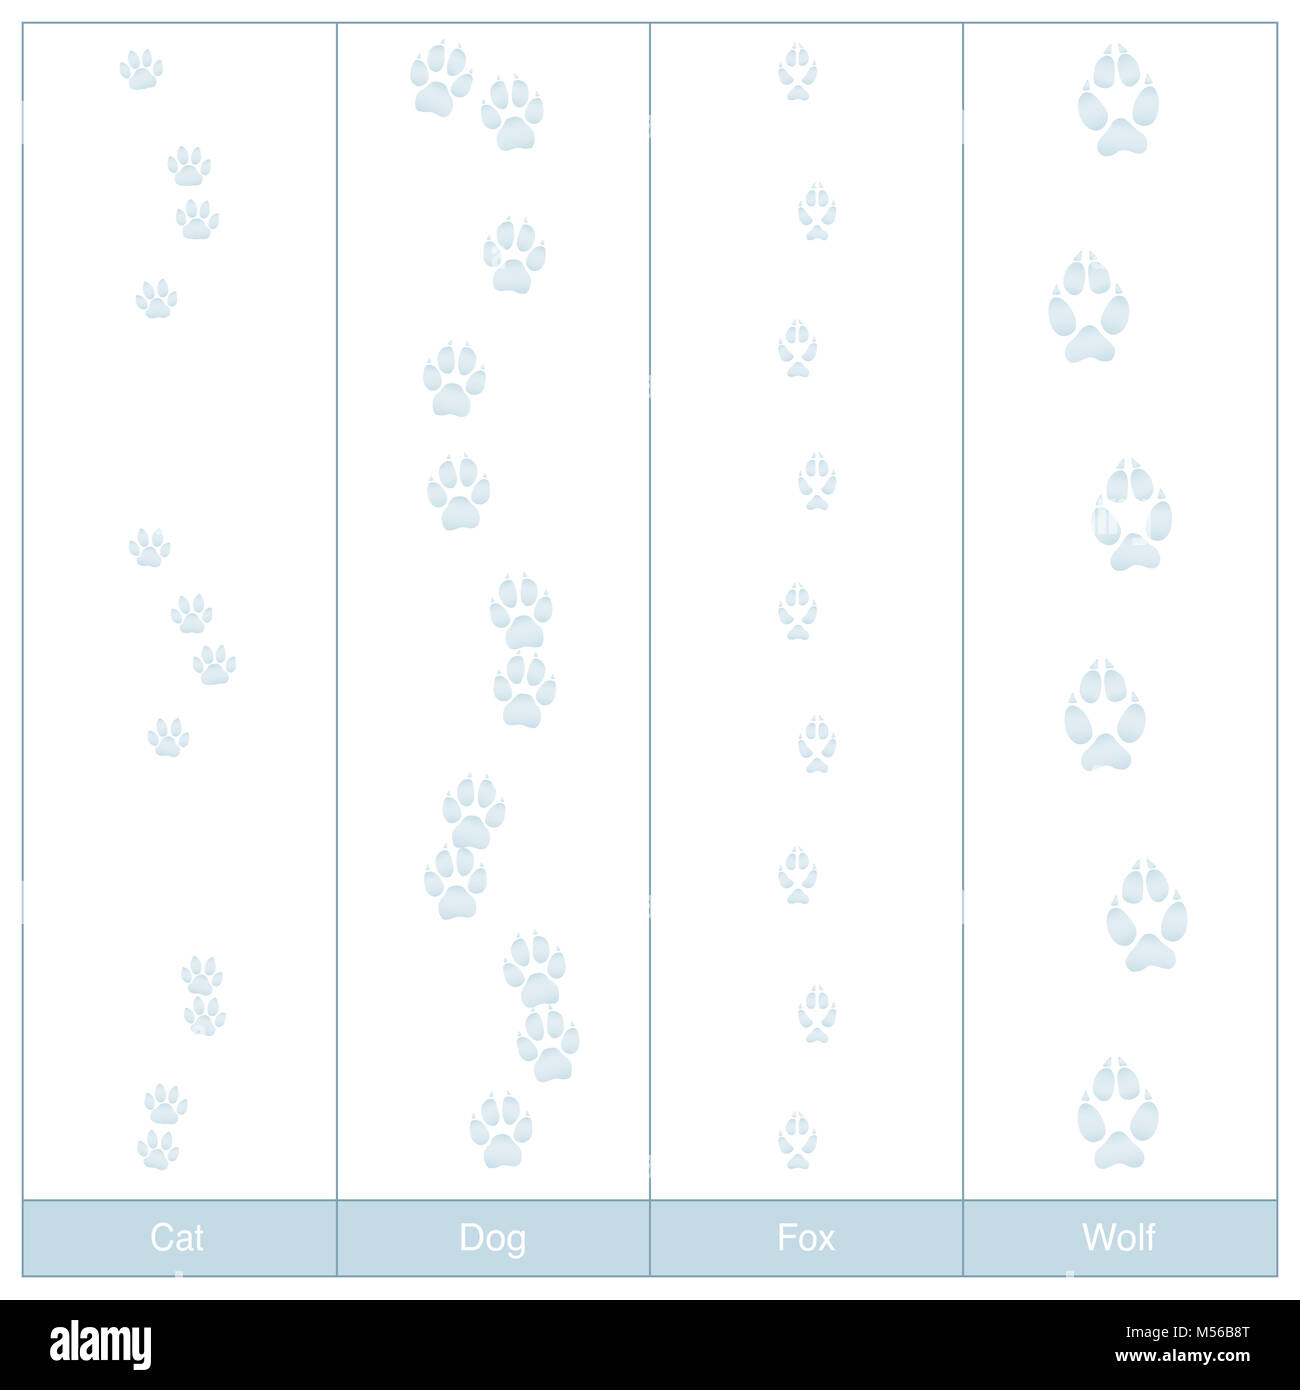 Tracks of dog, cat, fox and wolf. Carnivore paw prints in snow to compare - illustration on white background. Stock Photo